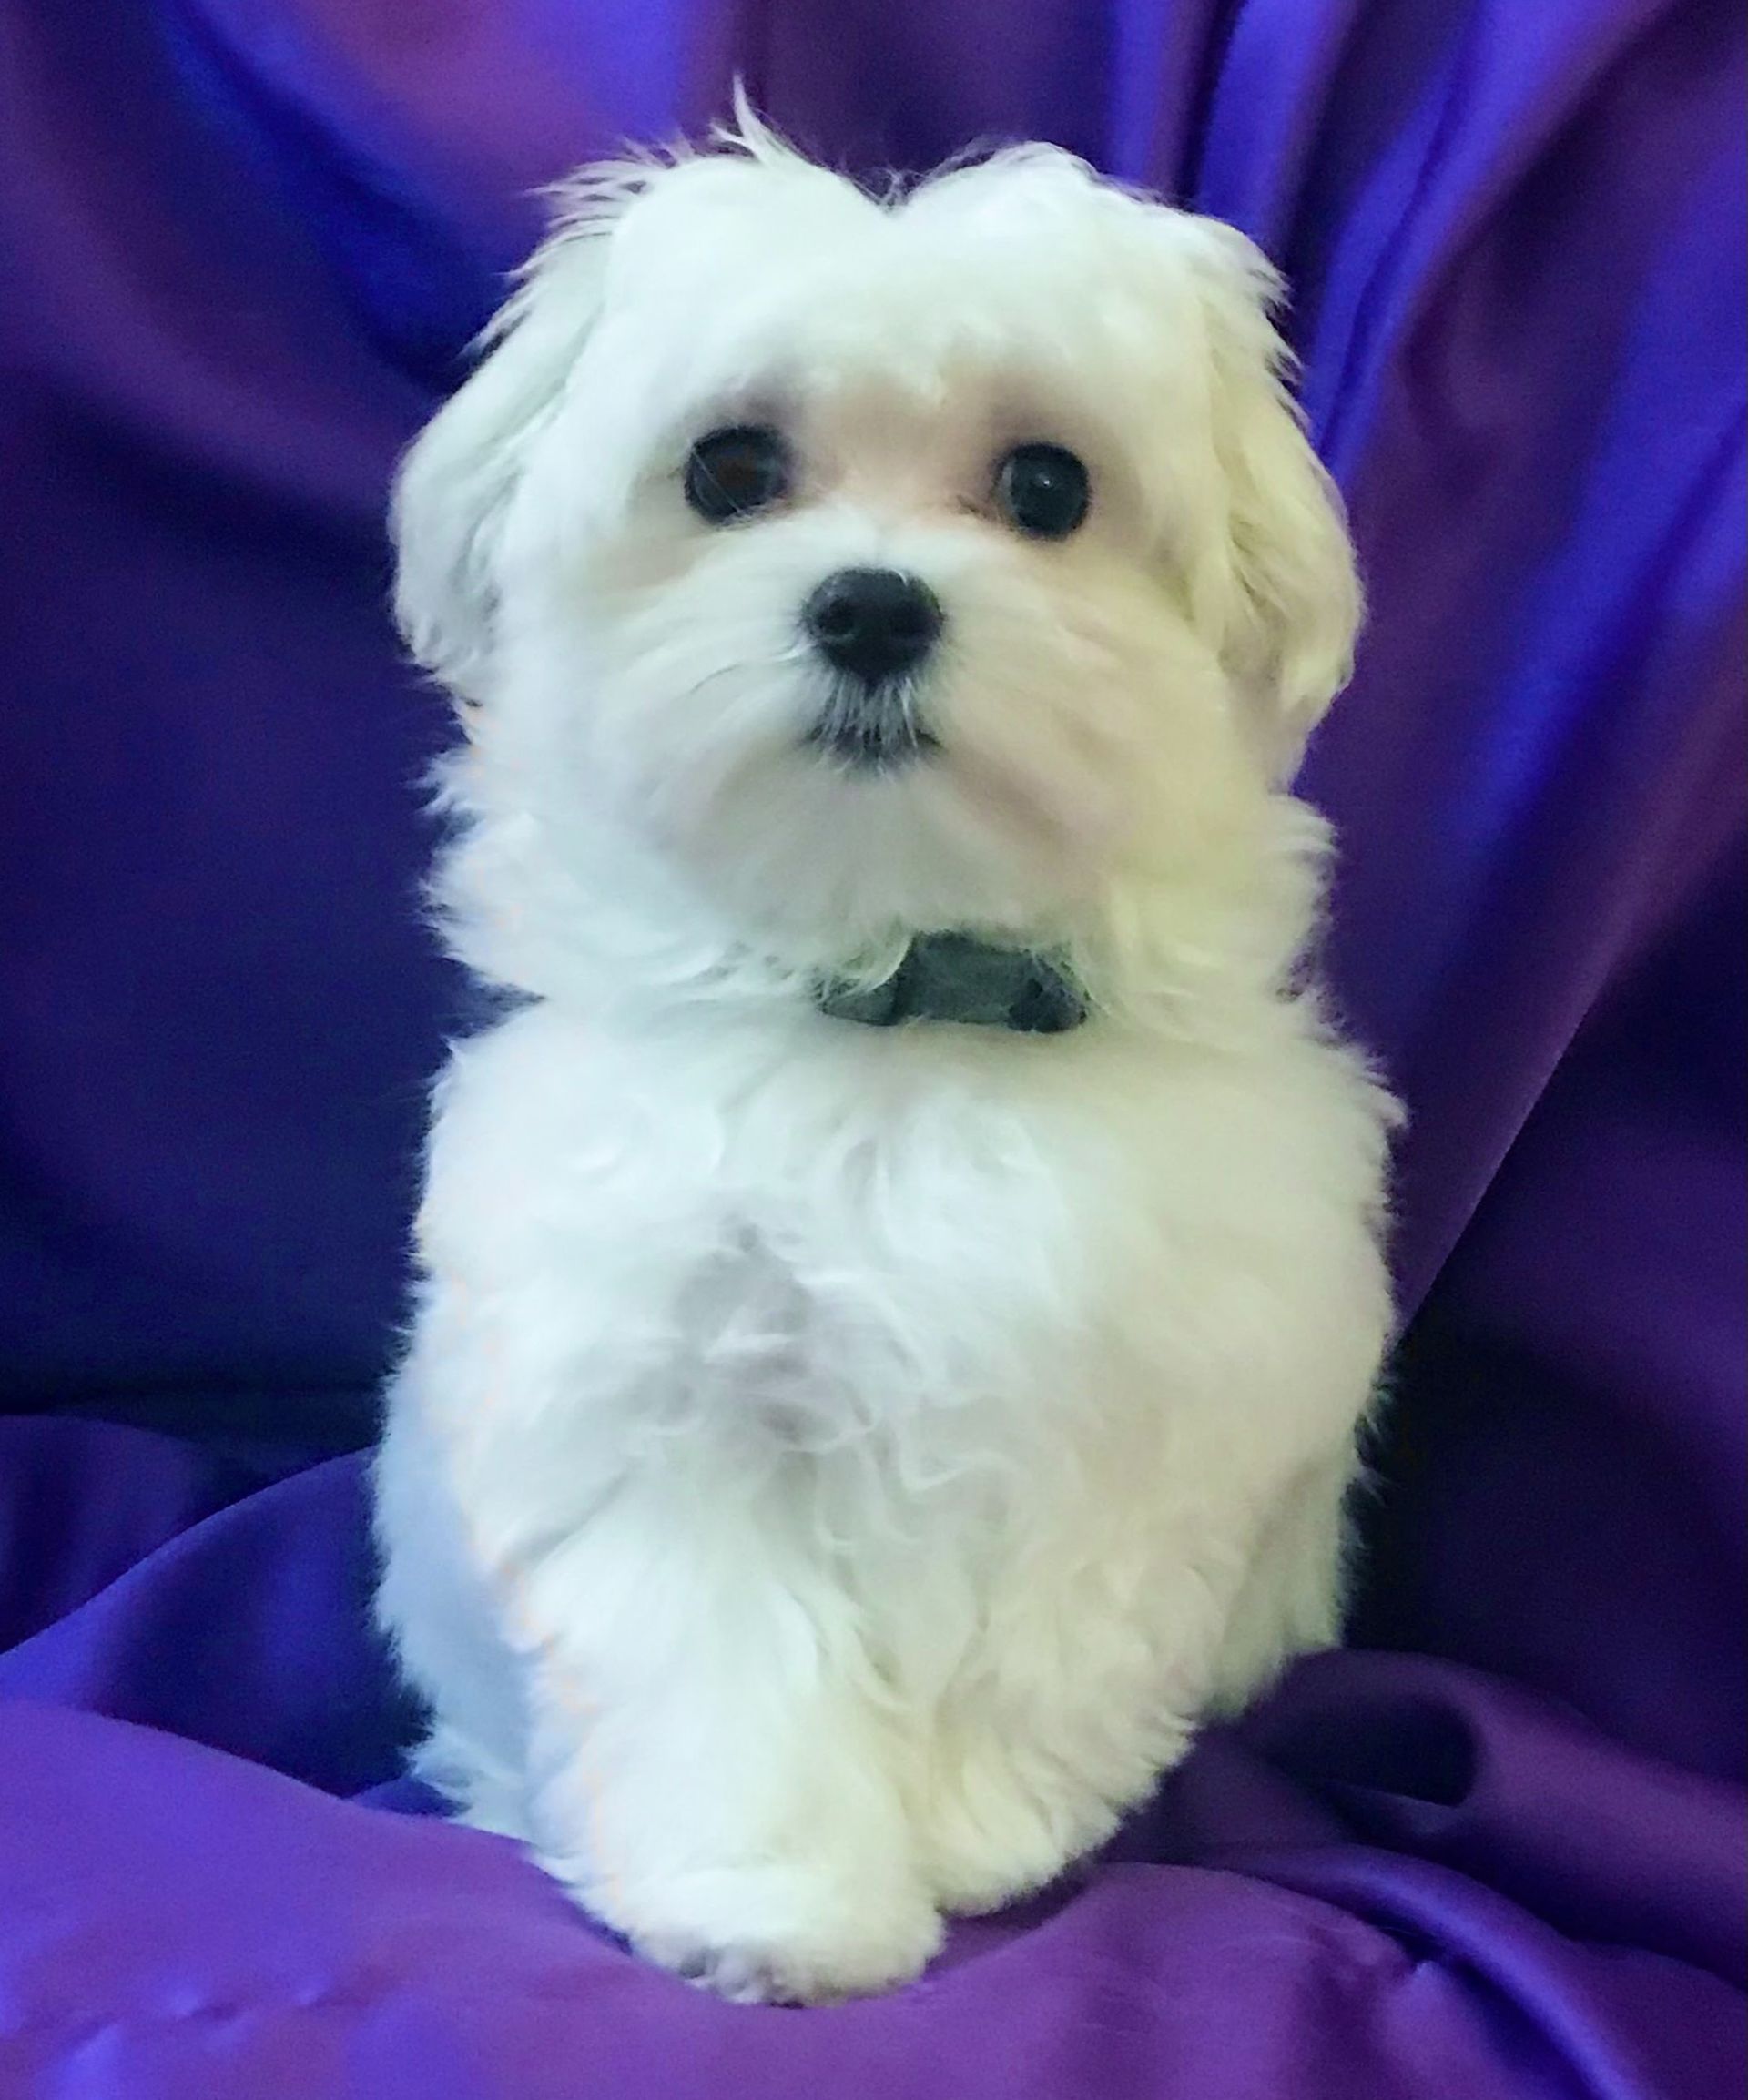 poochon puppies for sale, poochon puppies, poochon breeder, poochon, bichpoo puppies for sale, bich poo, bichpoo, bichpoo breeder, bichon poodle puppies for sale, bichon poodle puppies, bichon poodle, bichpoo puppies for sale, bichpoo, bichpoo breeder, bichon poodle breeder, teddybear puppies for sale, teddy bear puppies, teddy bear puppy breeder, puppies for sale, small puppy breeder, dog breeder, small dog breeder, brick house puppies, poodle, bichon, min poodle, toy poodle, bichon frise, poodle mix puppies for sale, 